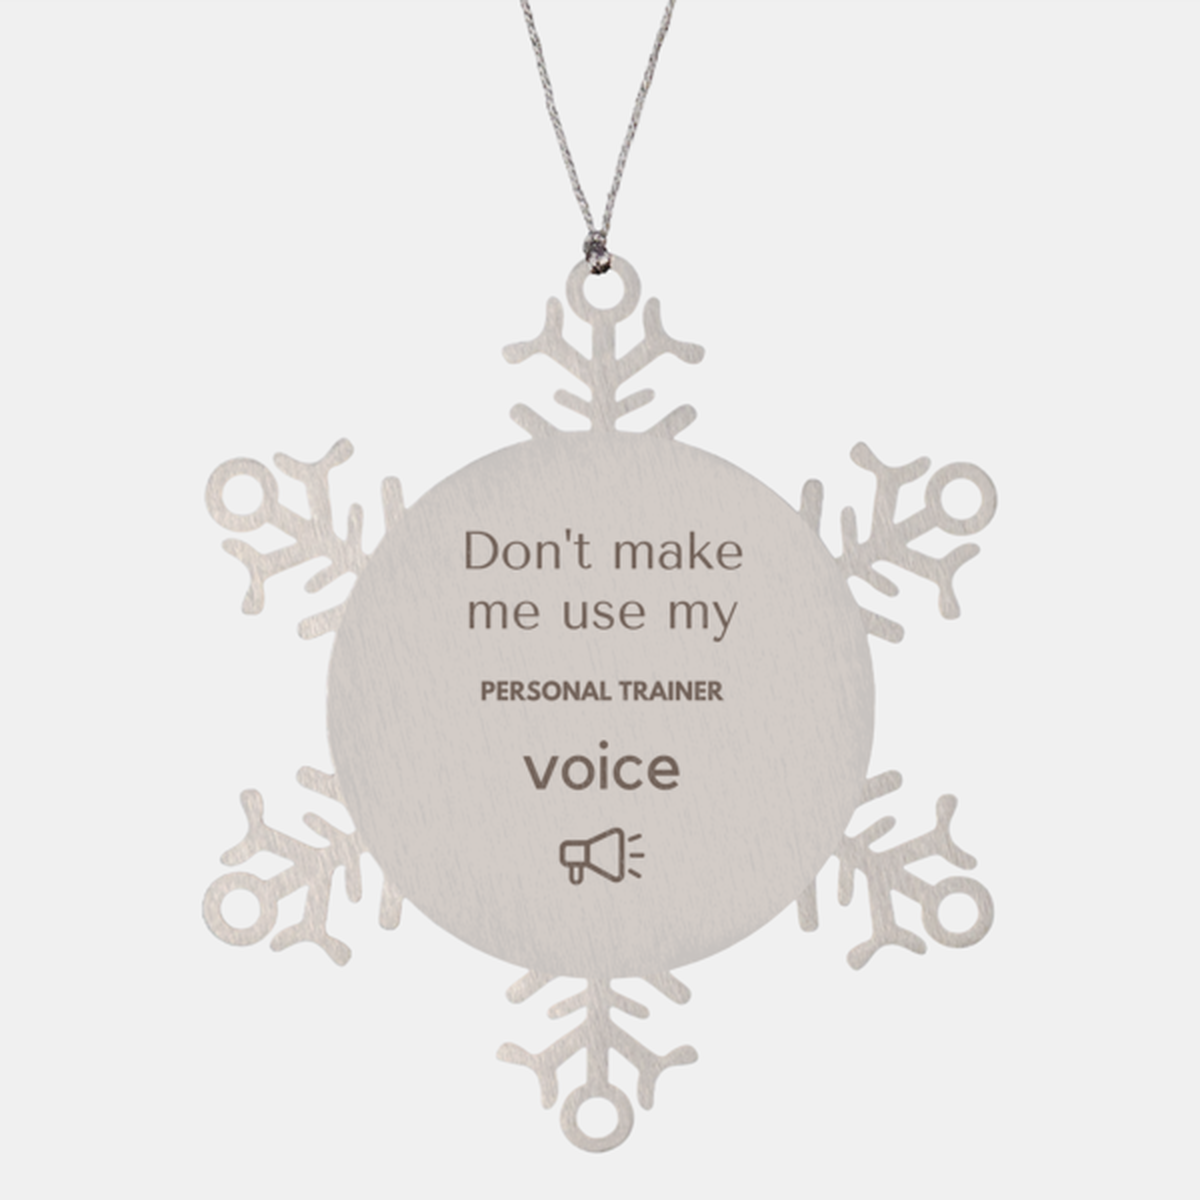 Don't make me use my Personal Trainer voice, Sarcasm Personal Trainer Ornament Gifts, Christmas Personal Trainer Snowflake Ornament Unique Gifts For Personal Trainer Coworkers, Men, Women, Colleague, Friends